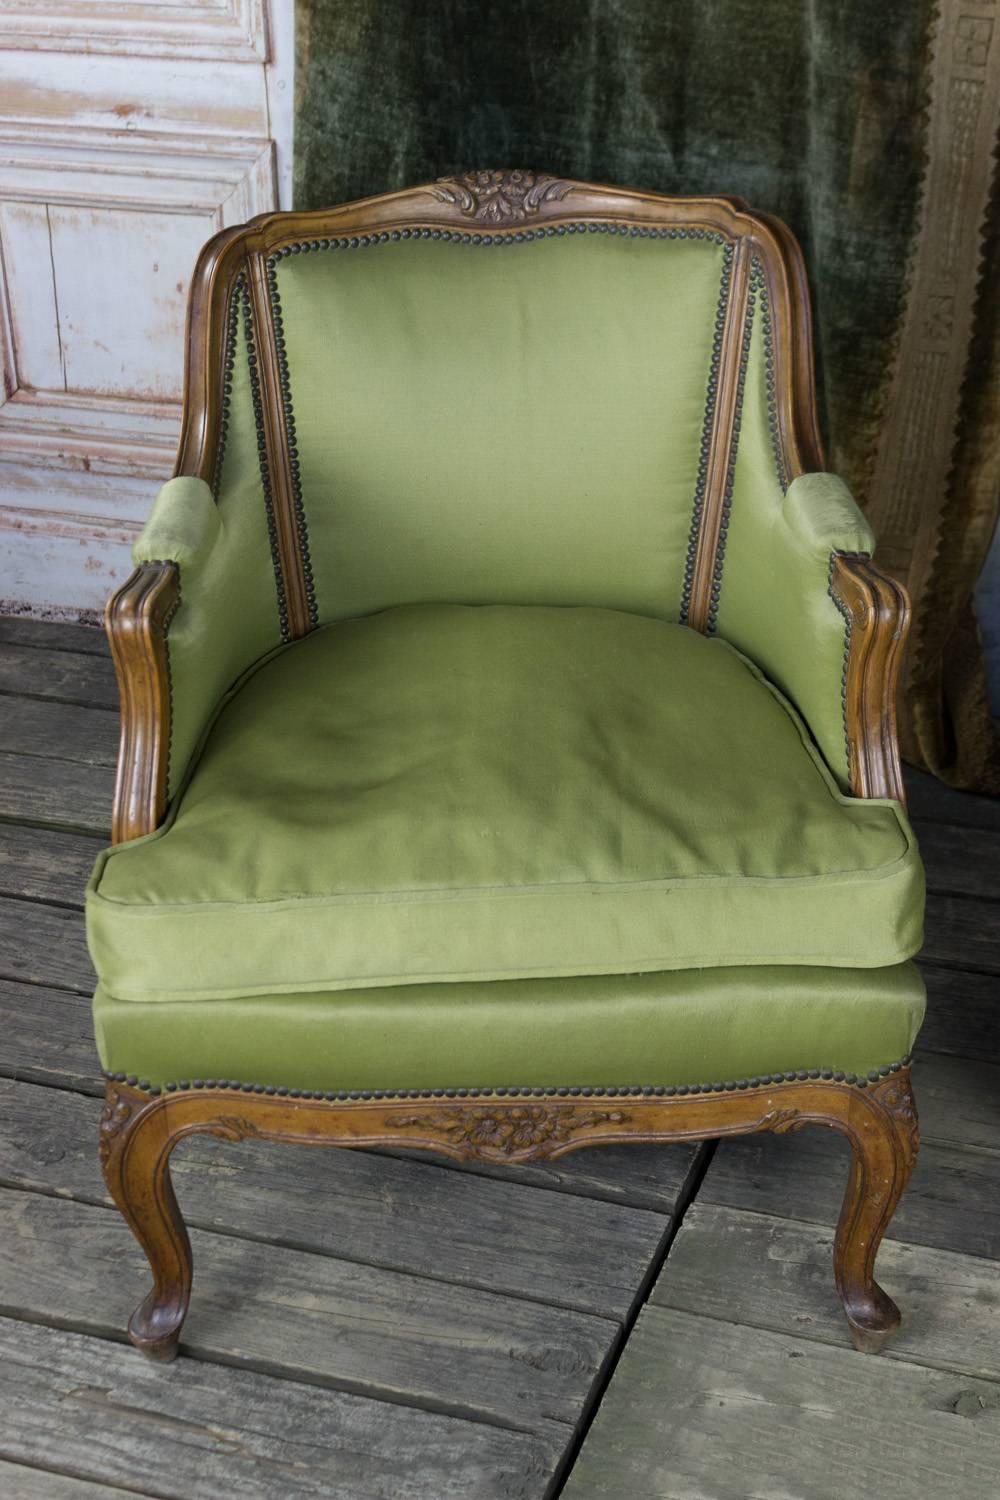 Pair of Louis XV style armchairs with fruitwood exposed frame and cabriole legs in a green fabric and loose seat.